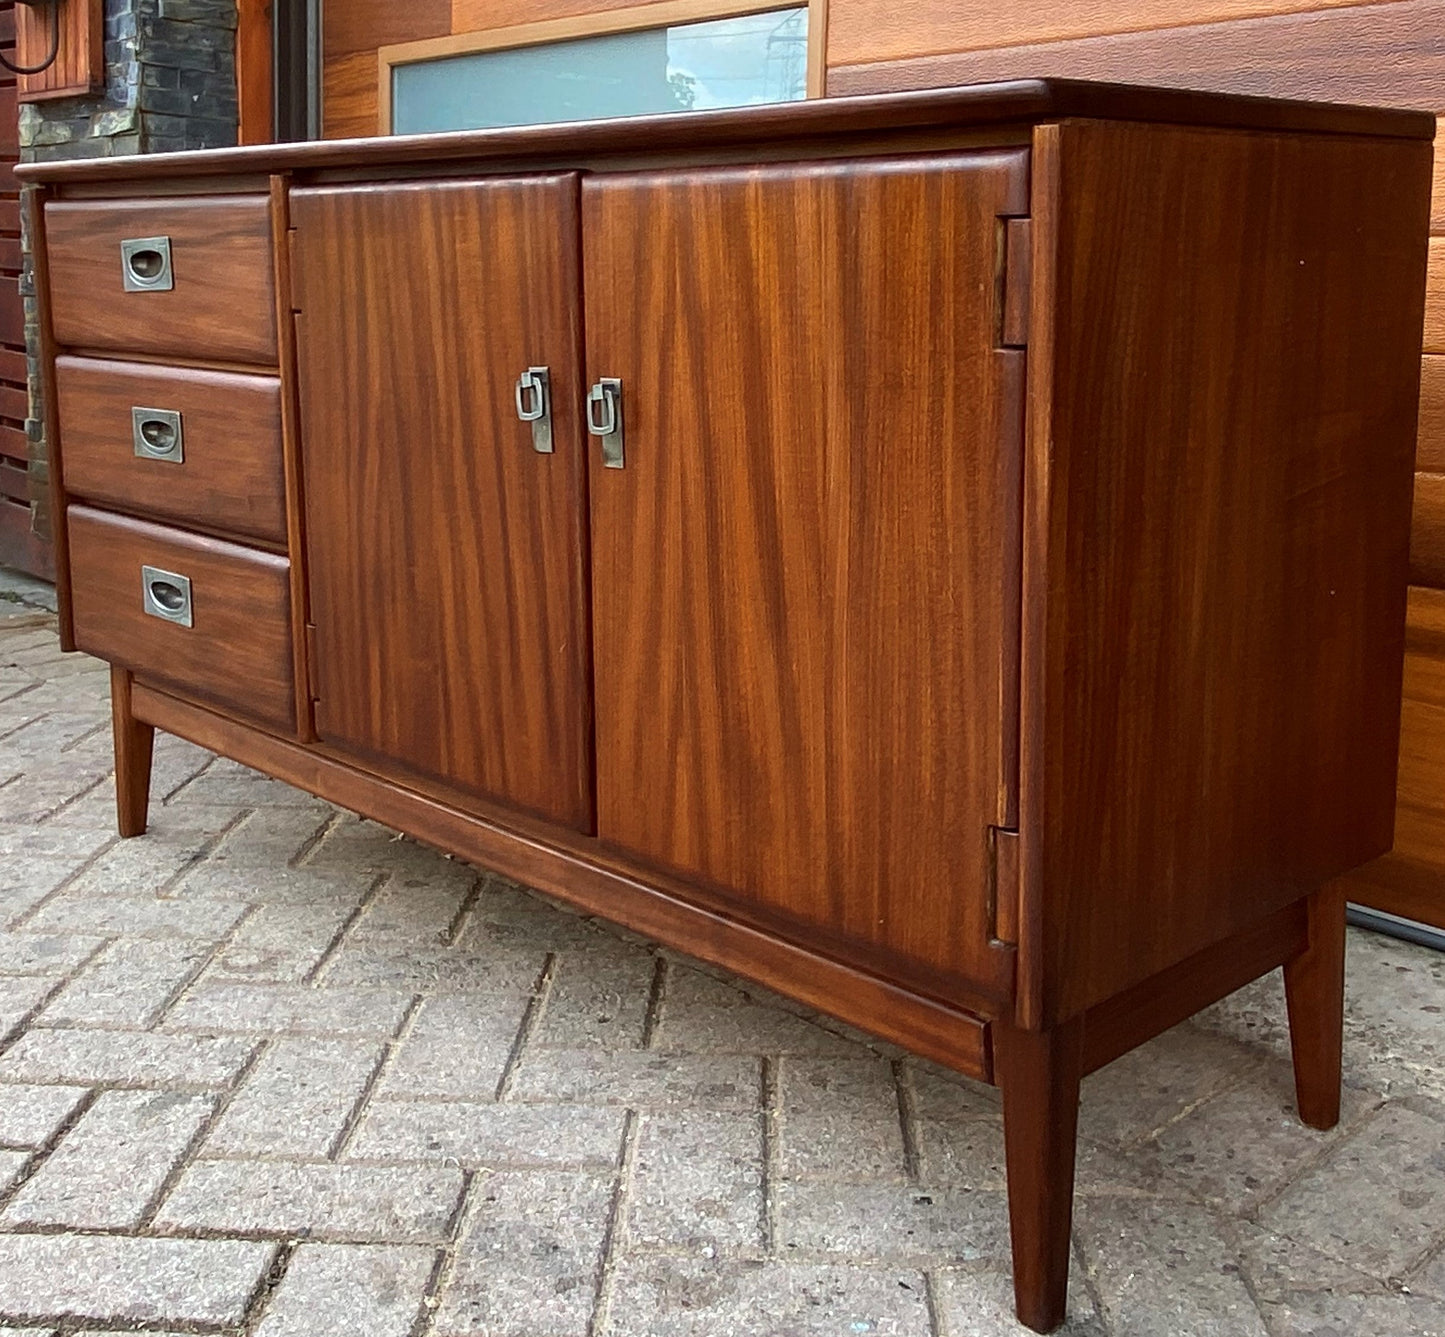 REFINISHED Mid Century Modern SOLID TEAK Buffet by Imperial 54", PERFECT